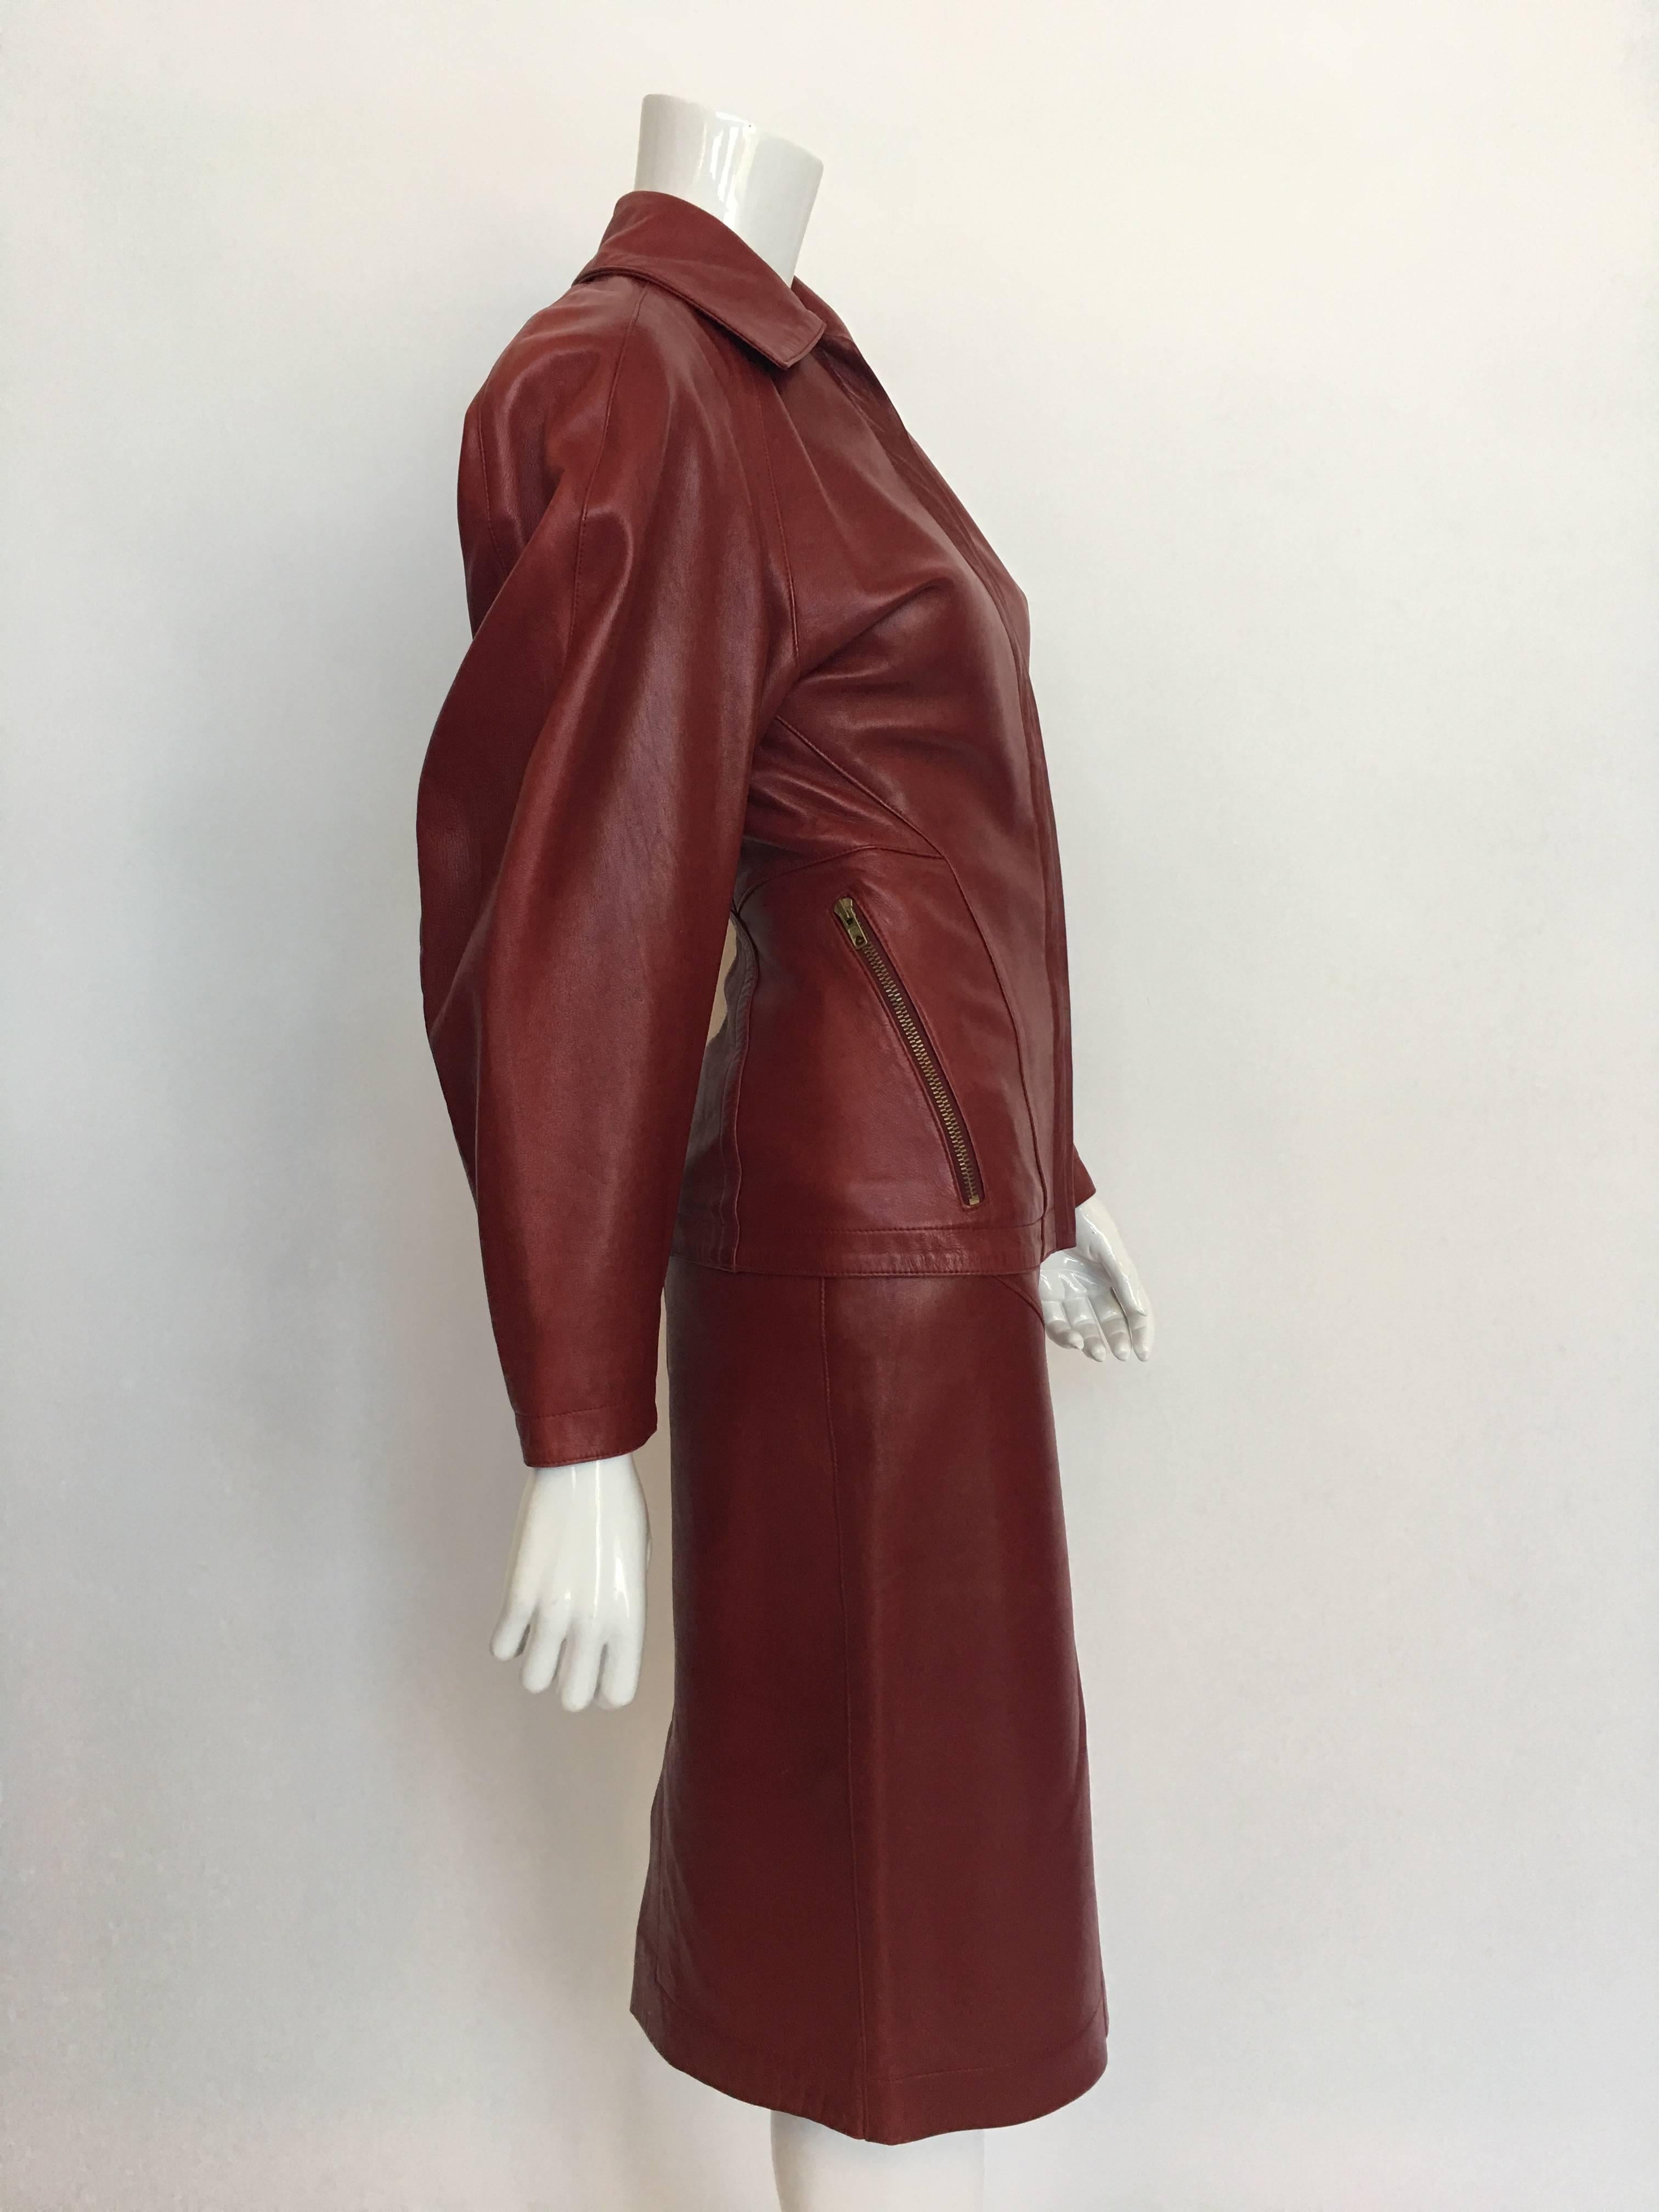 Alaia 1980's Red Leather Skirt Suit with 2 front zip pockets and back inverted pleating.
Skirt has a size zip and snap closure with a back vent. Skirt is also fully lined and contains belt loops.

*ALL MEASUREMENTS TAKEN FLAT*

Jacket
Label Size: